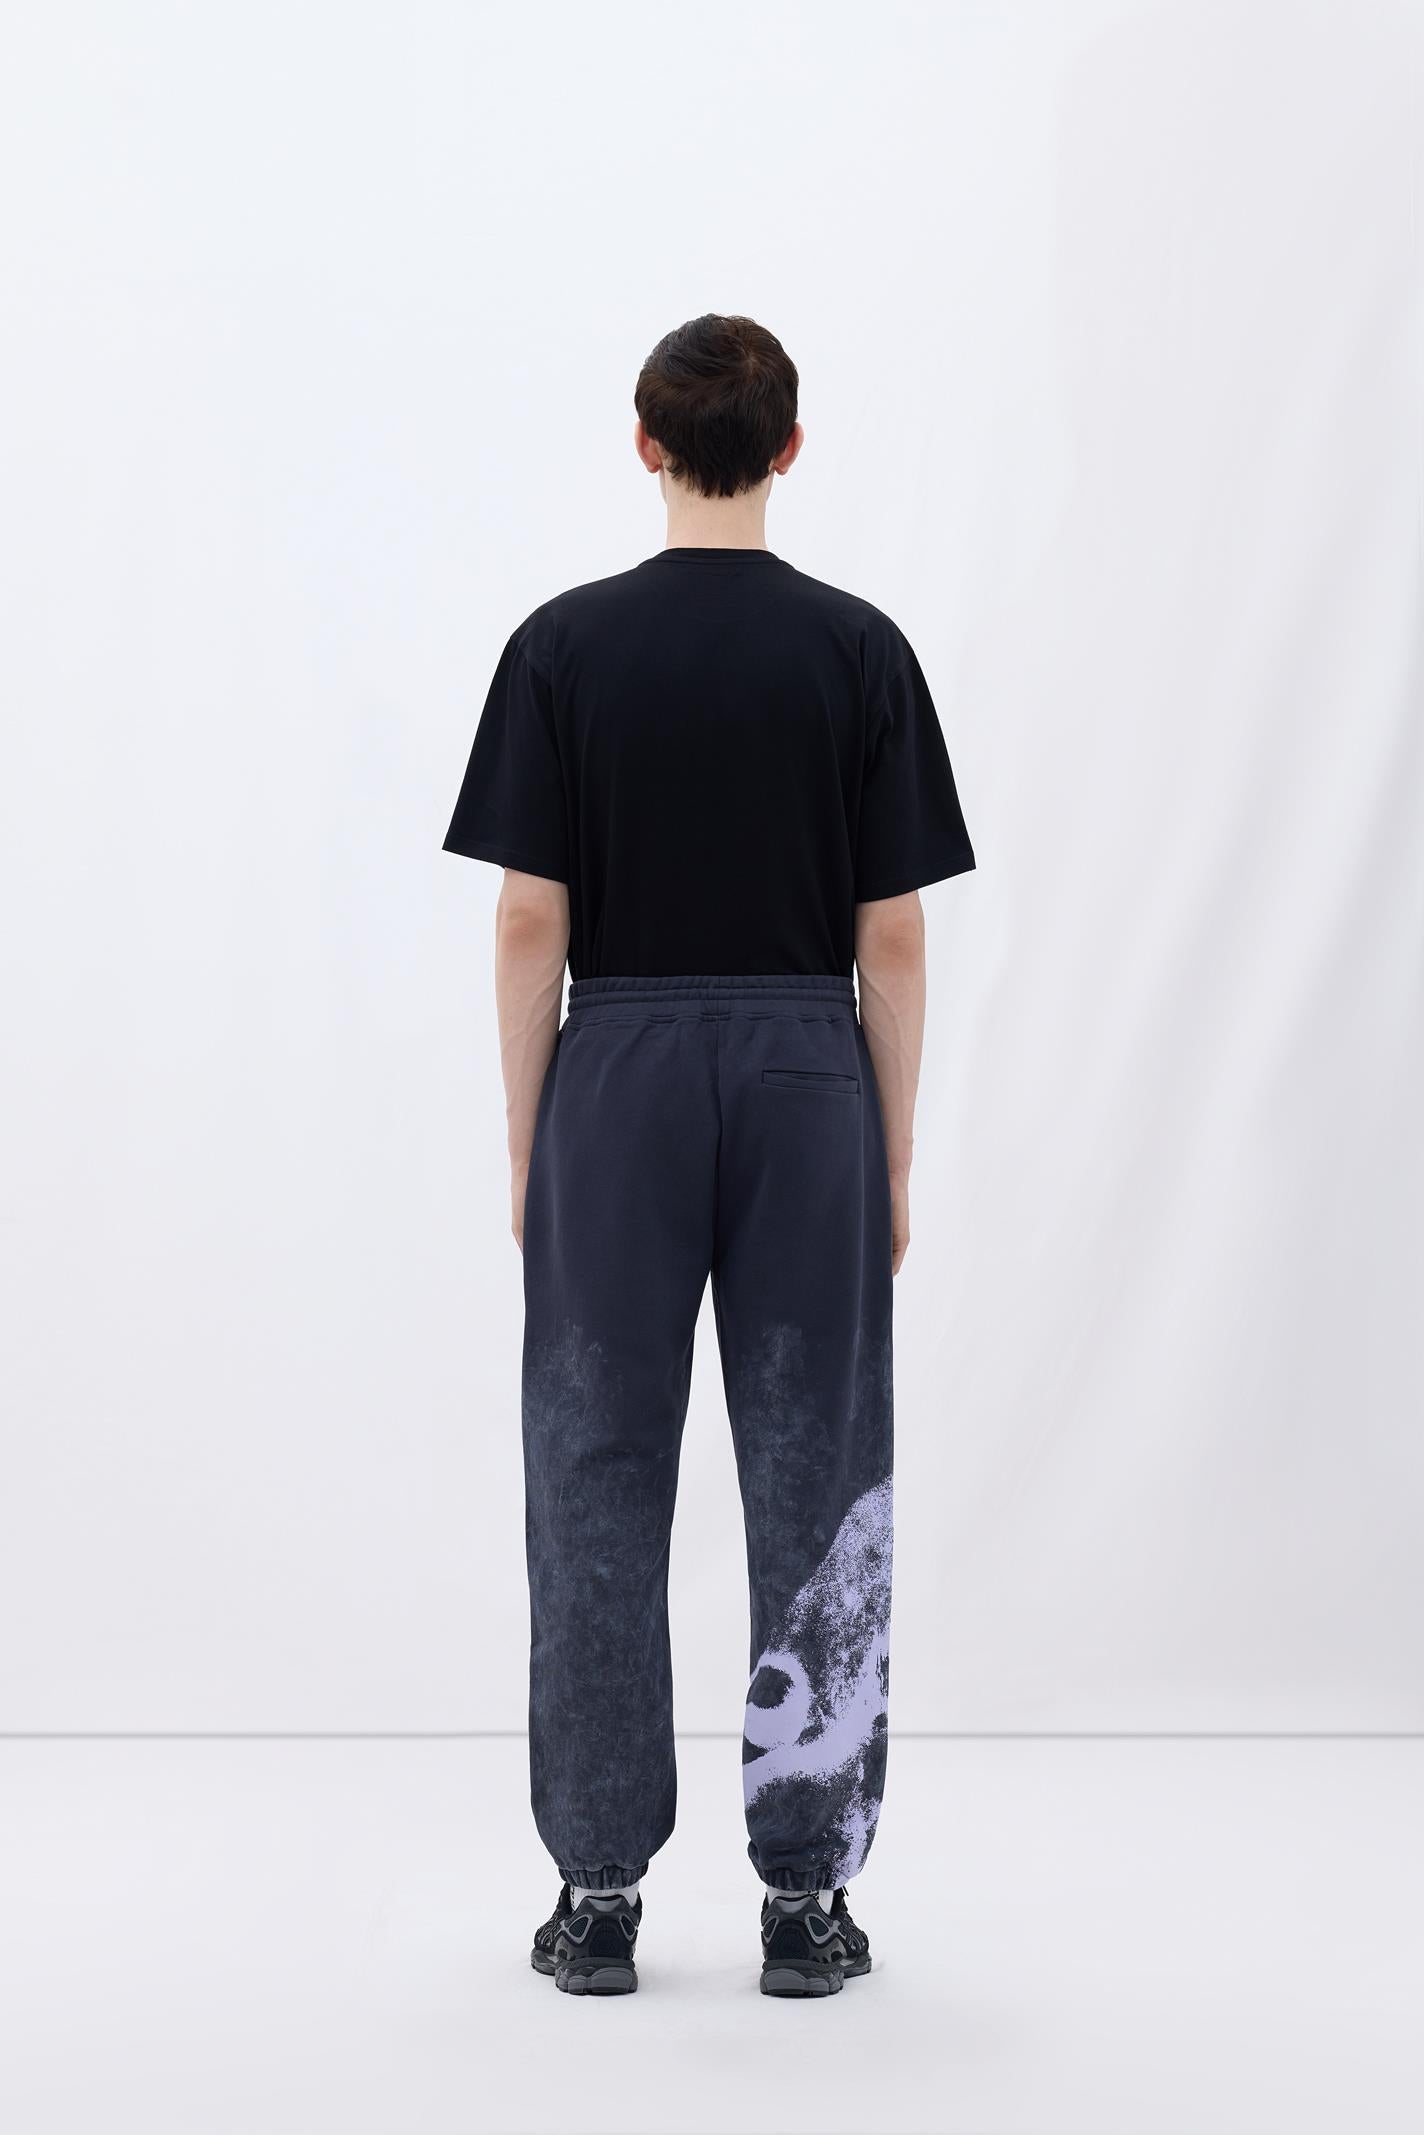  RELAXED SWEATPANT 005